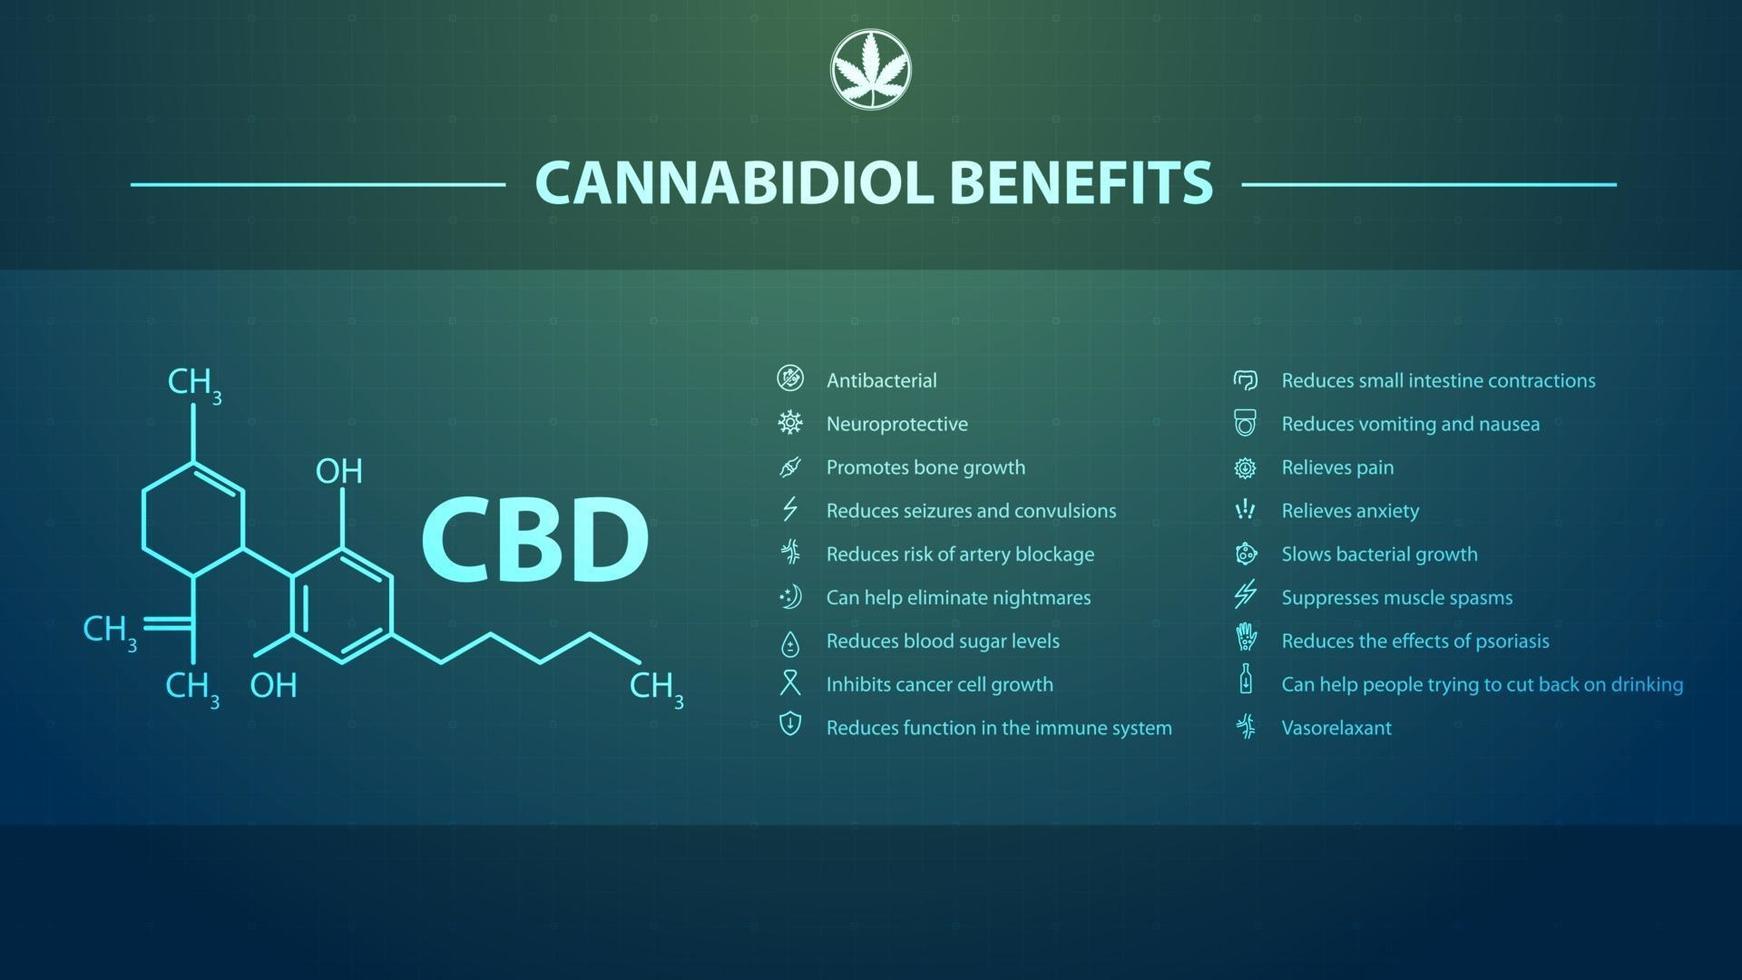 Cannabidiol Benefits, poster in digital style with cannabidiol benefits with icons and cannabidiol chemical formula vector